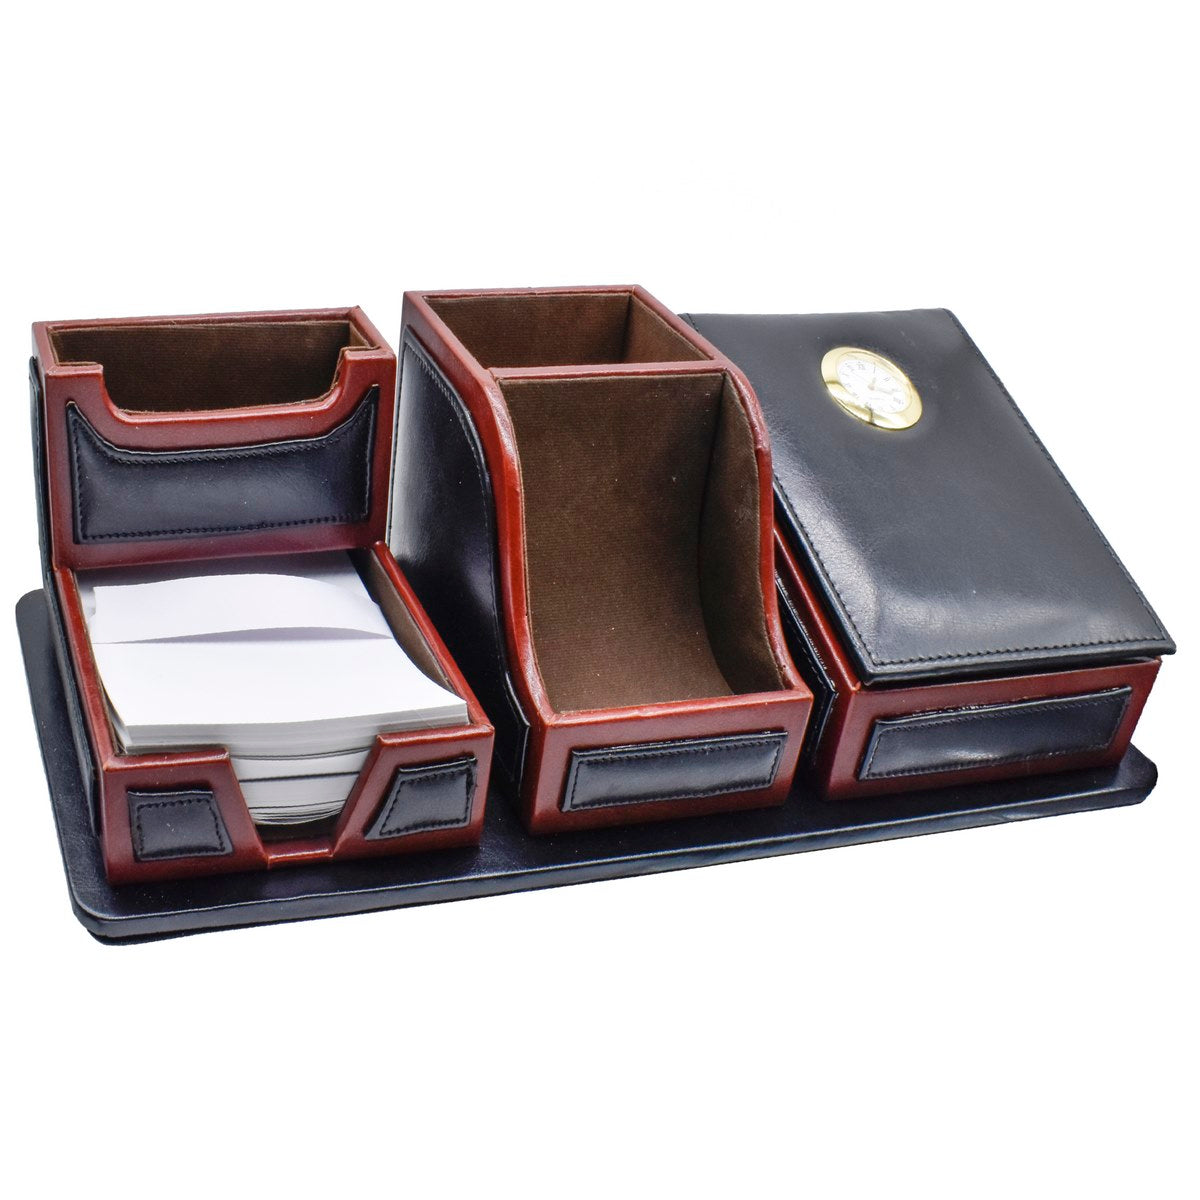 Dual Tone Multipurpose Premium Leather Table Stationery Organizer Combo Set with Clock - For Office Use, Personal Use, Corporate Gifting, Return Gift